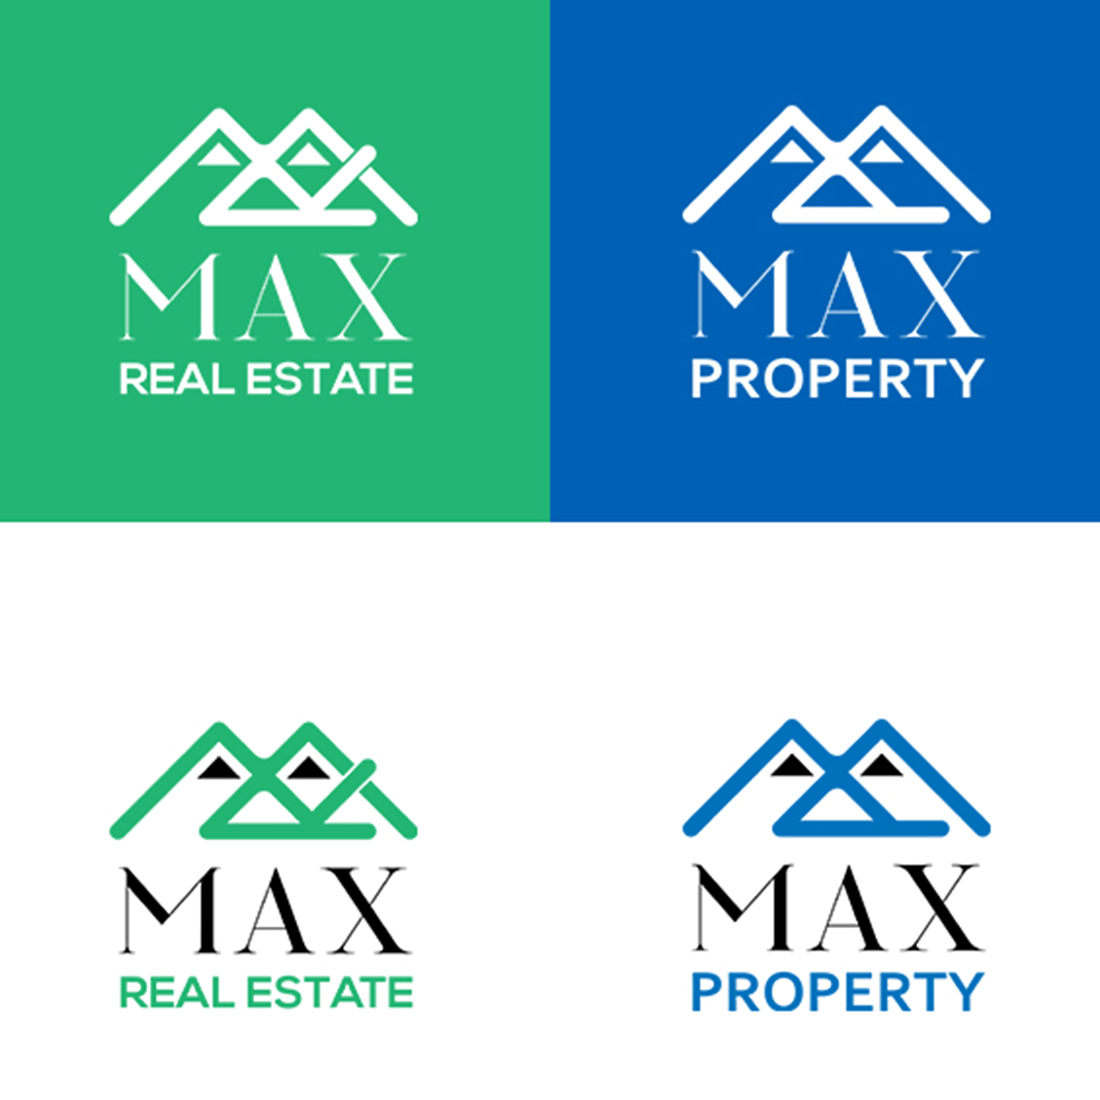 Property and Real Estate Company Logo Template 2 in 1 cover image.